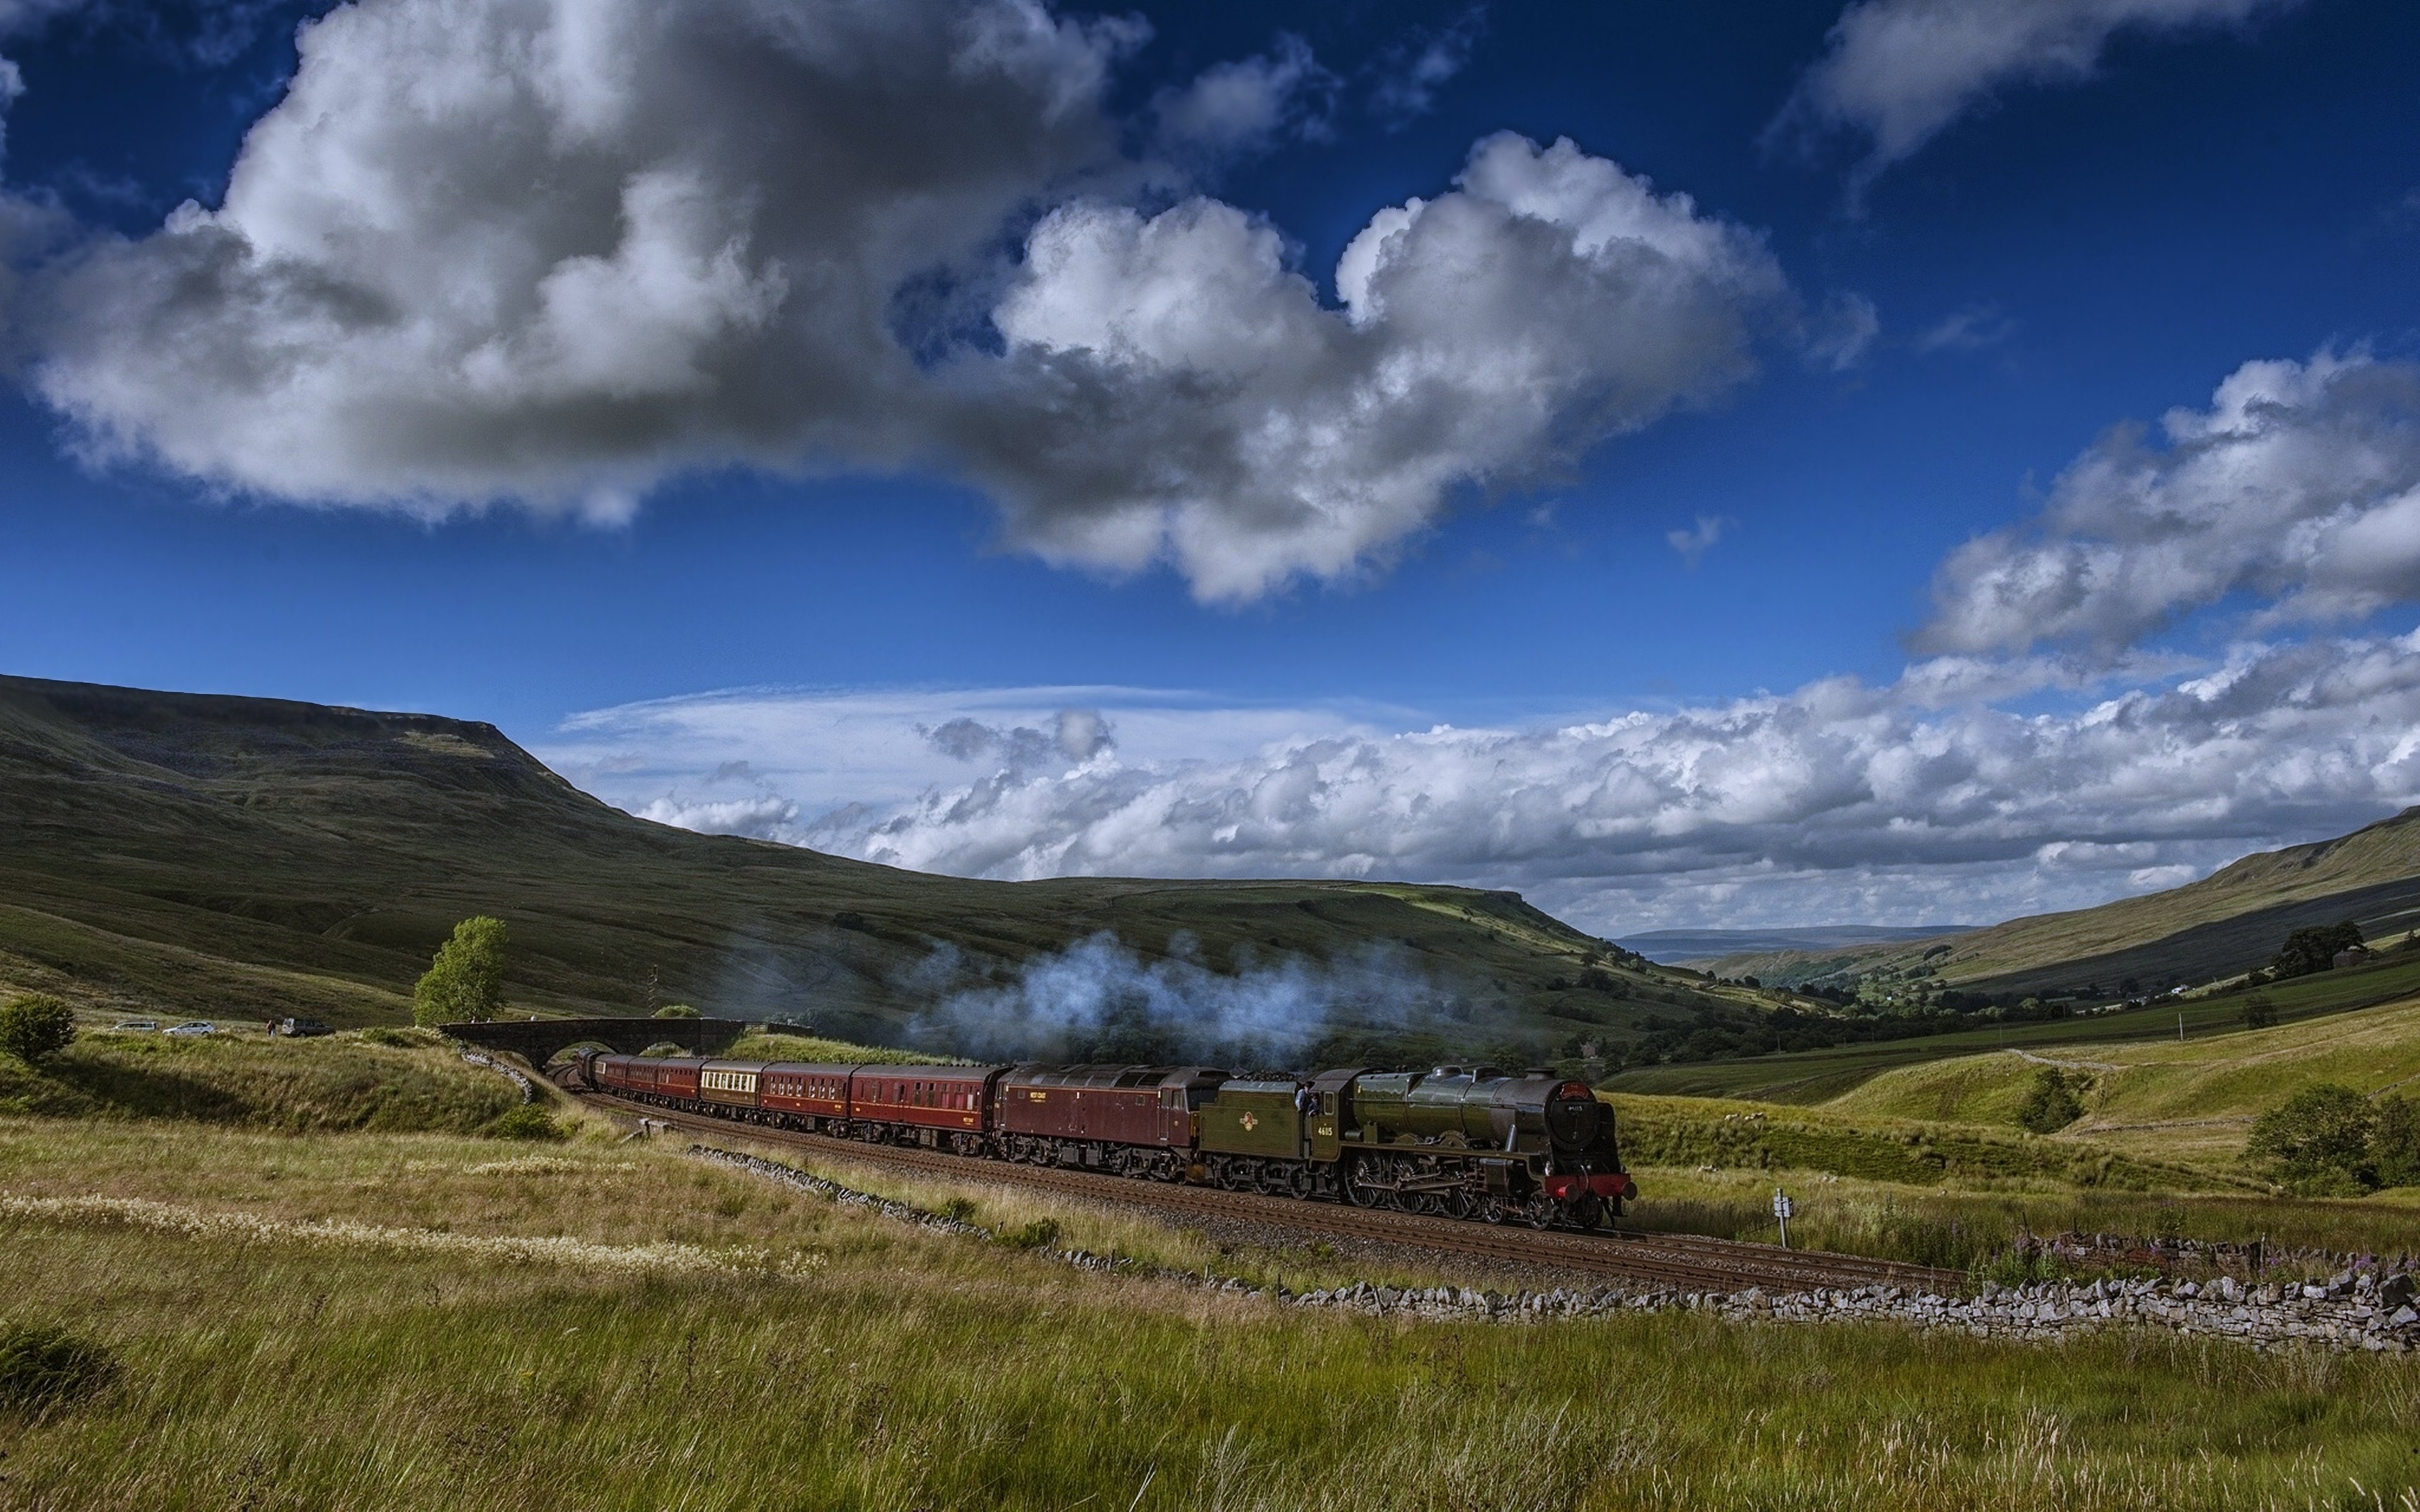 landscapes, Nature, Countryside, Trains, Motors, Speed, Hills, Filds, Sky, Clouds, Mountains, Grass Wallpaper